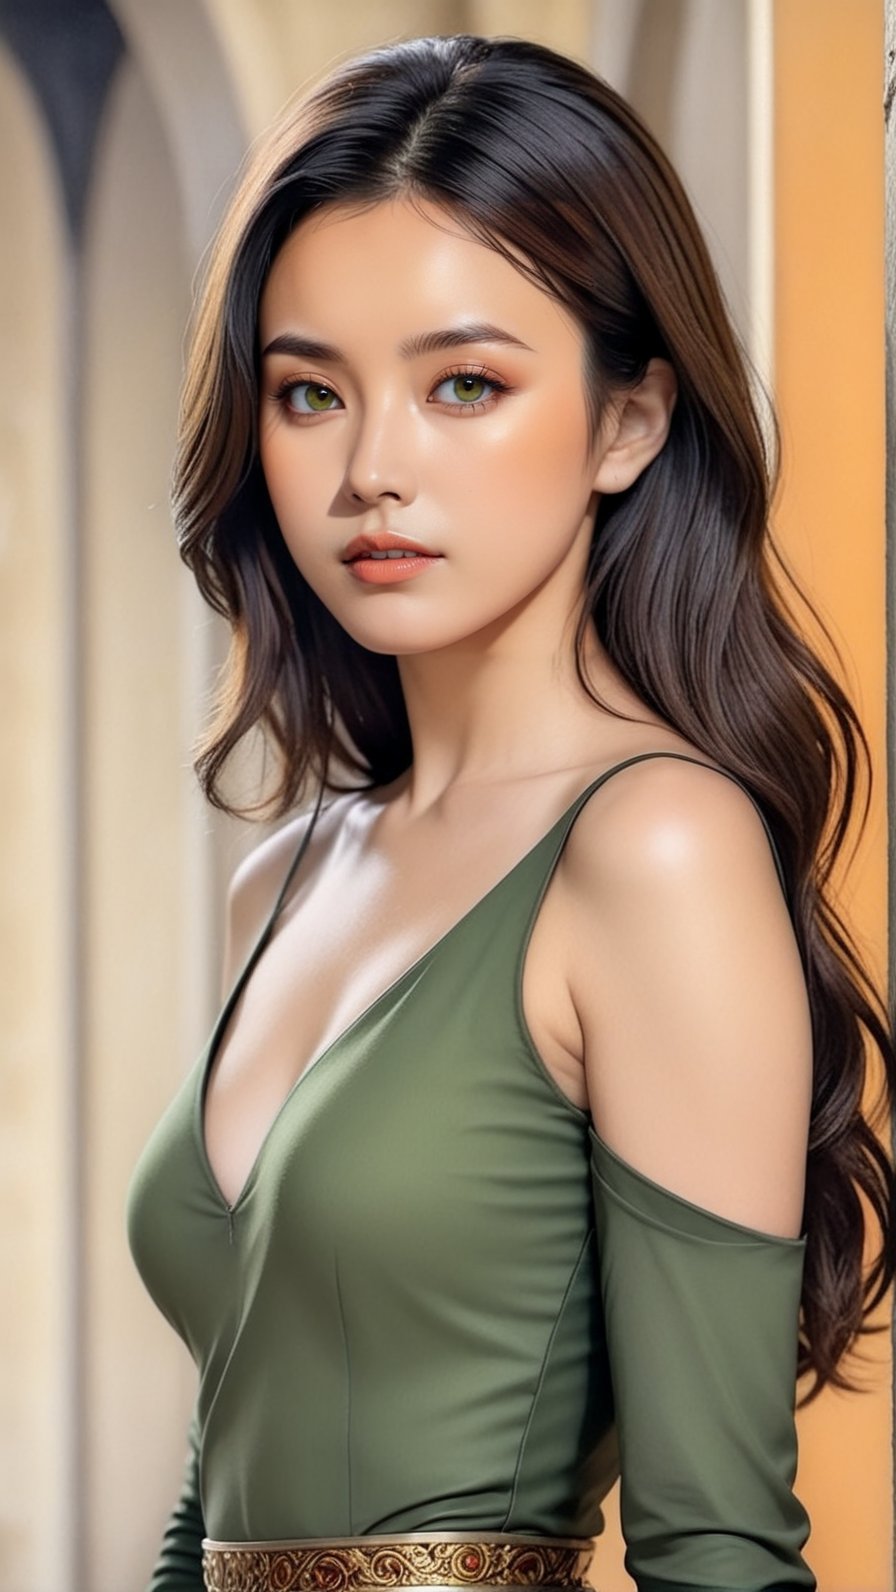 ((Hyper-Realistic)) (fullbody:1.3) photo of a girl,20yo,1girl,detailed exquisite symmetric face,soft shiny skin,glossy lips,smile,mesmerizing,detailed disheveled hair,perfect female form,perfect body proportion,perfect anatomy,(elegant dress),(Persian Orange,Tiger-Eye and Olive Green color),(beautiful knees and highheels)
BREAK
(detailed realistic backdrop of Kamanets-Podilsky Castle in Kamanets-Podilsky in western Ukraine,distant view:1.3)
BREAK
rule of thirds,perfect composition,studio photo,trending on artstation,(Masterpiece,Best quality,32k,UHD:1.5),(sharp focus,high contrast,HDR,ray tracing,hyper-detailed,intricate details,ultra-realistic,award-winning photo,kodachrome 800:1.4),(cinematic lighting:1.2),by Karol Bak,Gustav Klimt,Gerald Brom and Hayao Miyazaki,
real_booster,art_booster,photo_b00ster,han-hyoju-xl